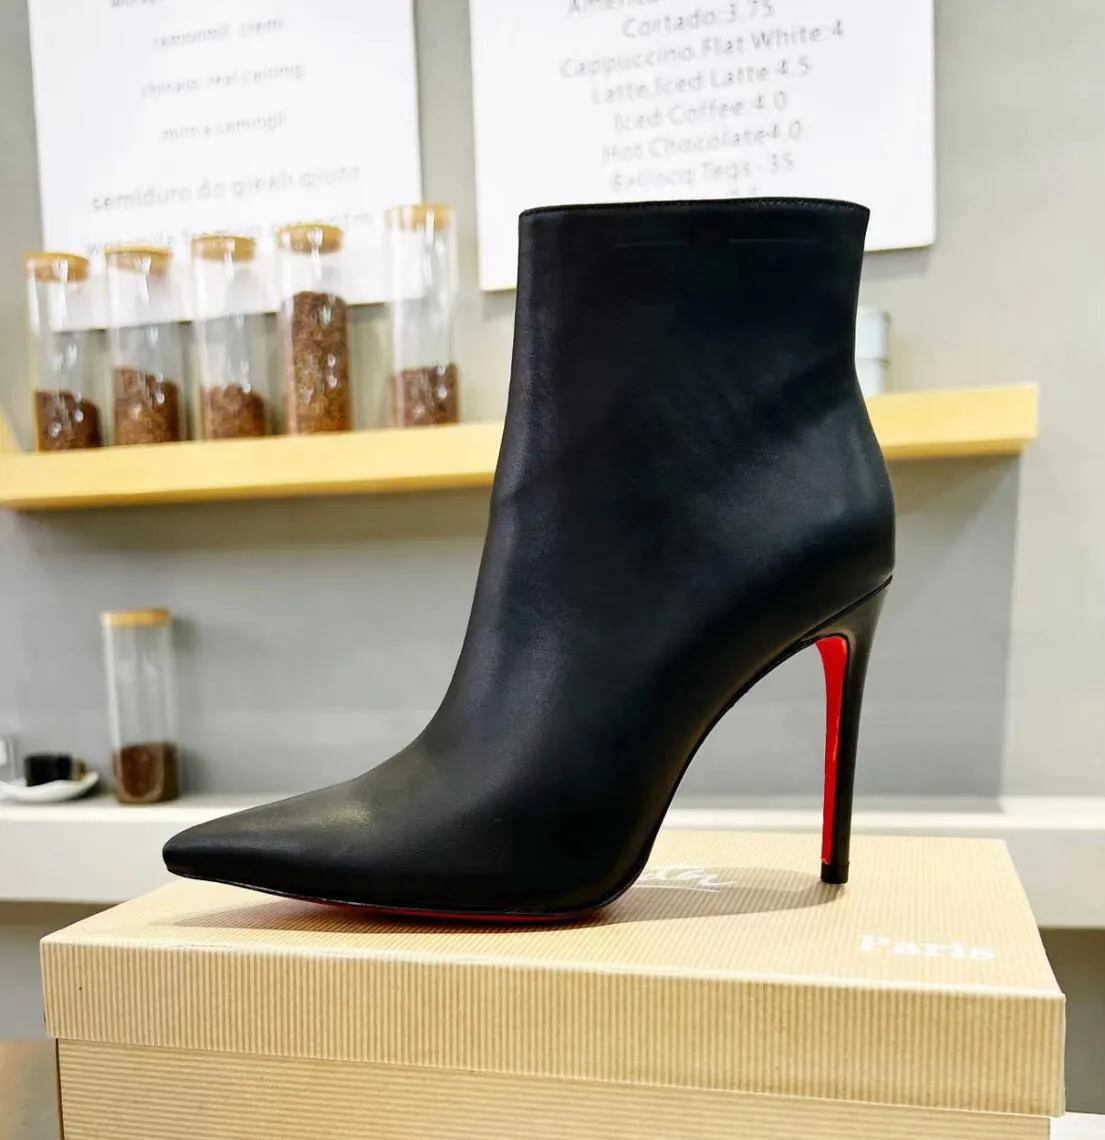 Women High Heels Boots Pointed Toe Shoes Red Shiny Bottoms Thin Heels 8cm 10cm Black Leather Boot Slender High Heel Fashion Autumn Winter New Short Boots 35-42